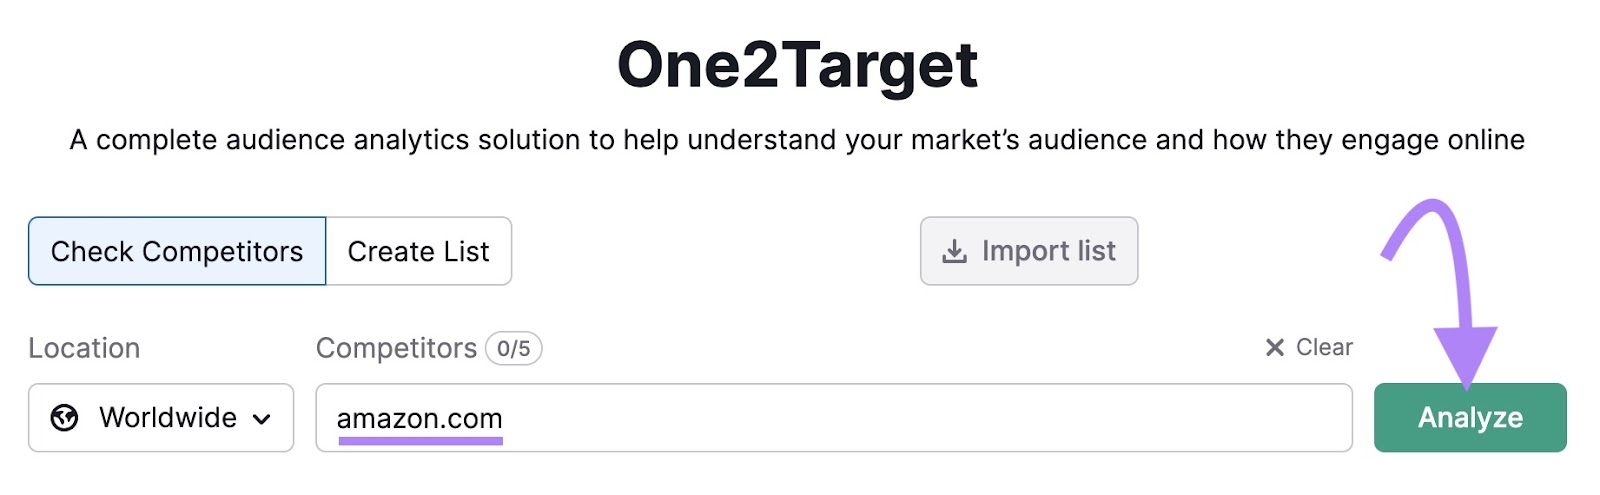 One2Target instrumentality   with “amazon.com” successful  the domain bar.